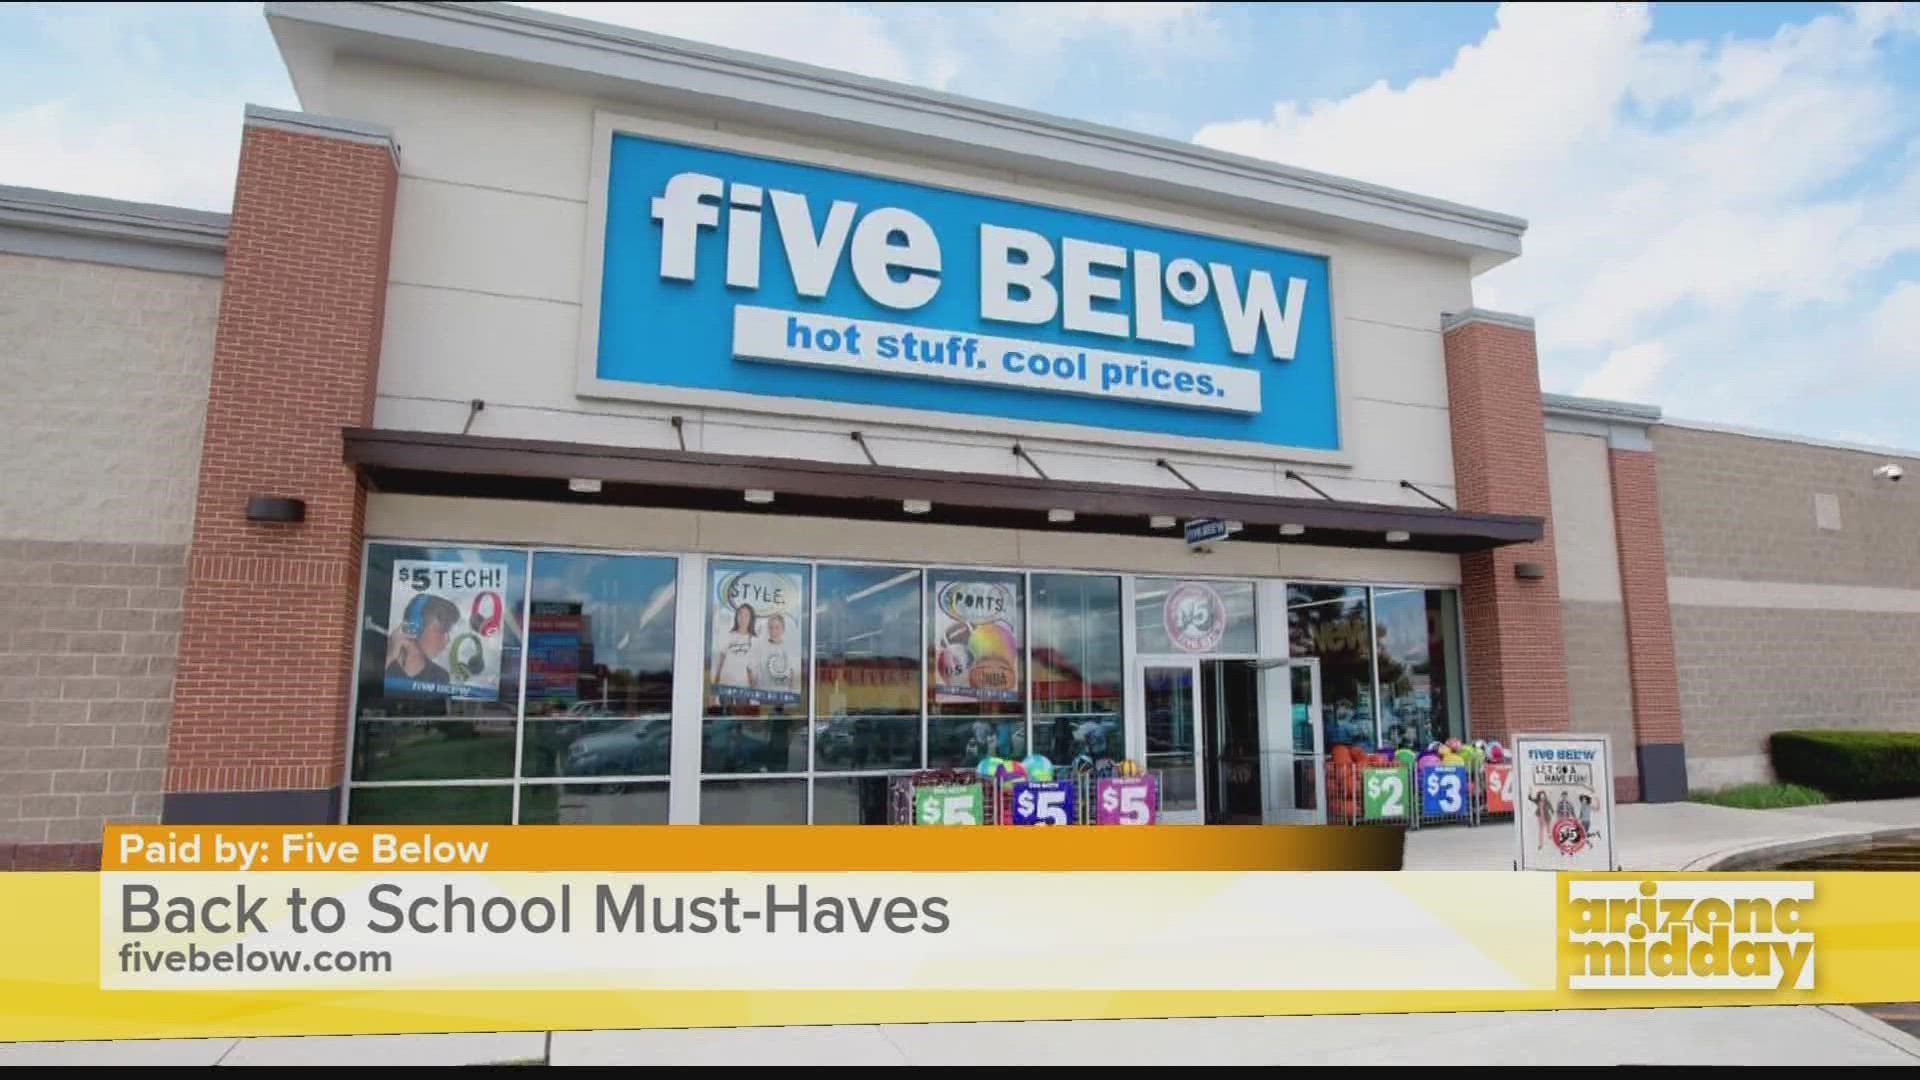 Lifestyle Expert, Barbara Majeski, shows us the top finds at a great price for back to school at Five Below!